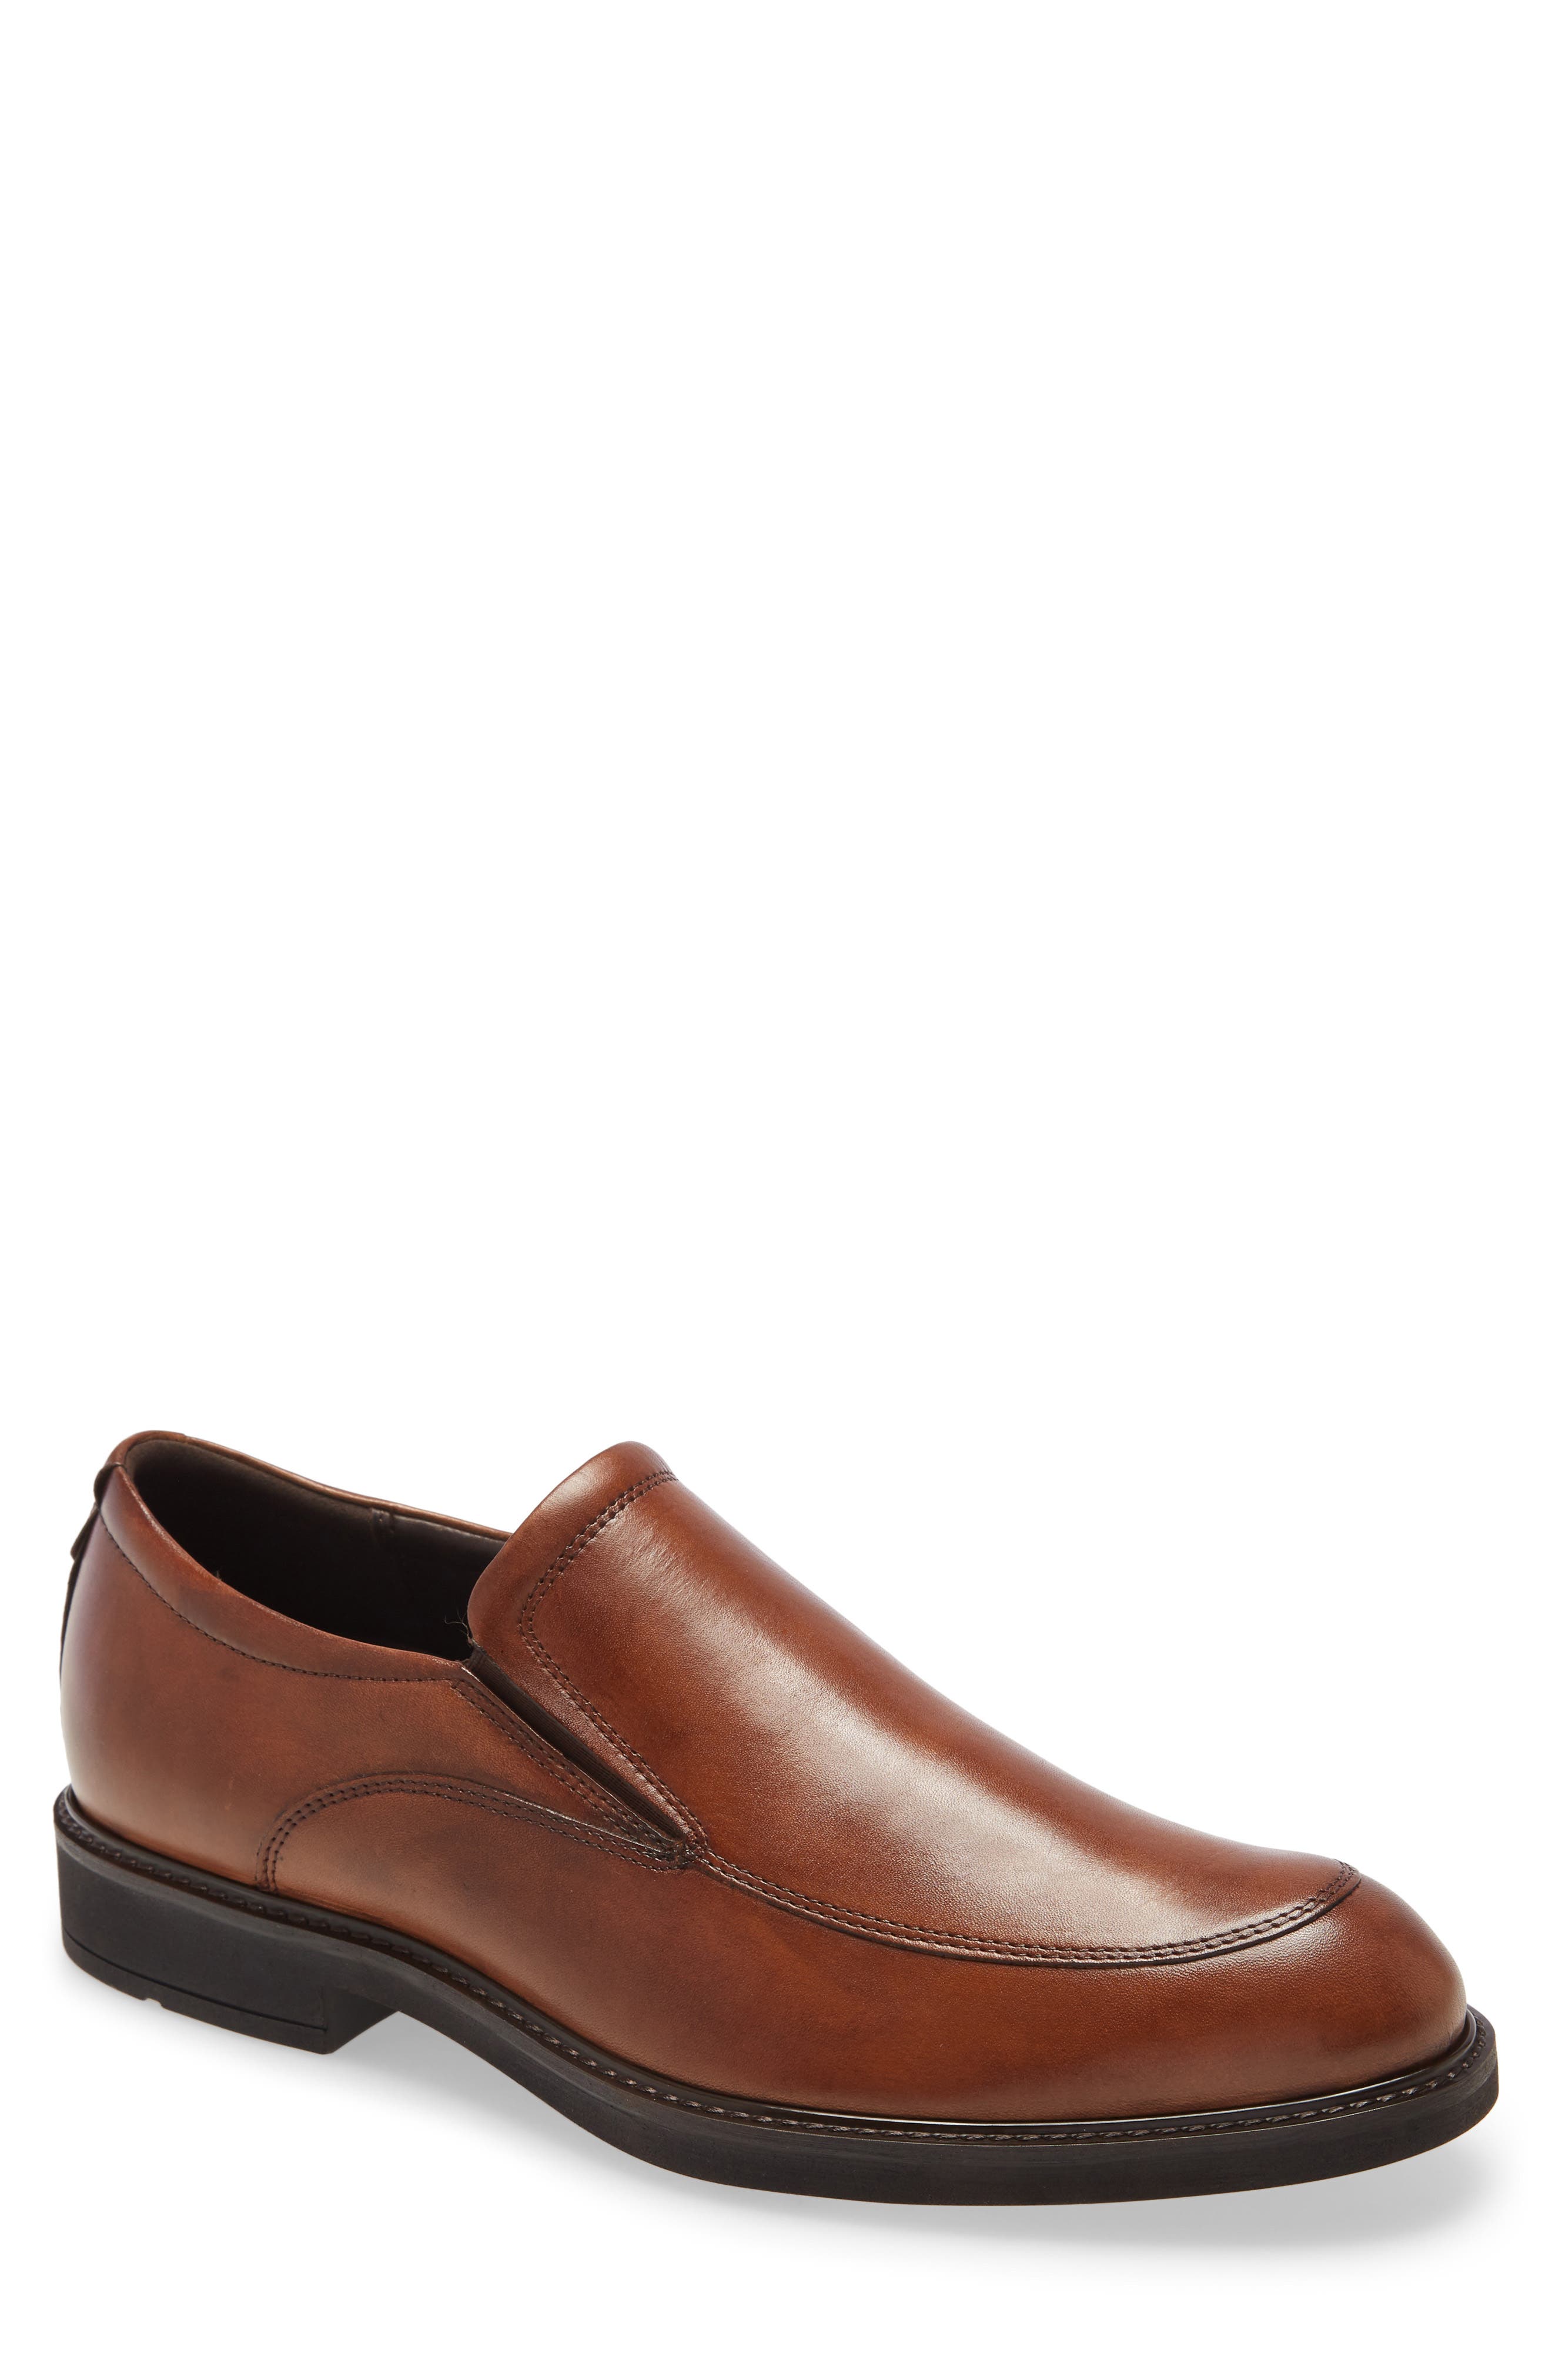 ecco slip on loafers